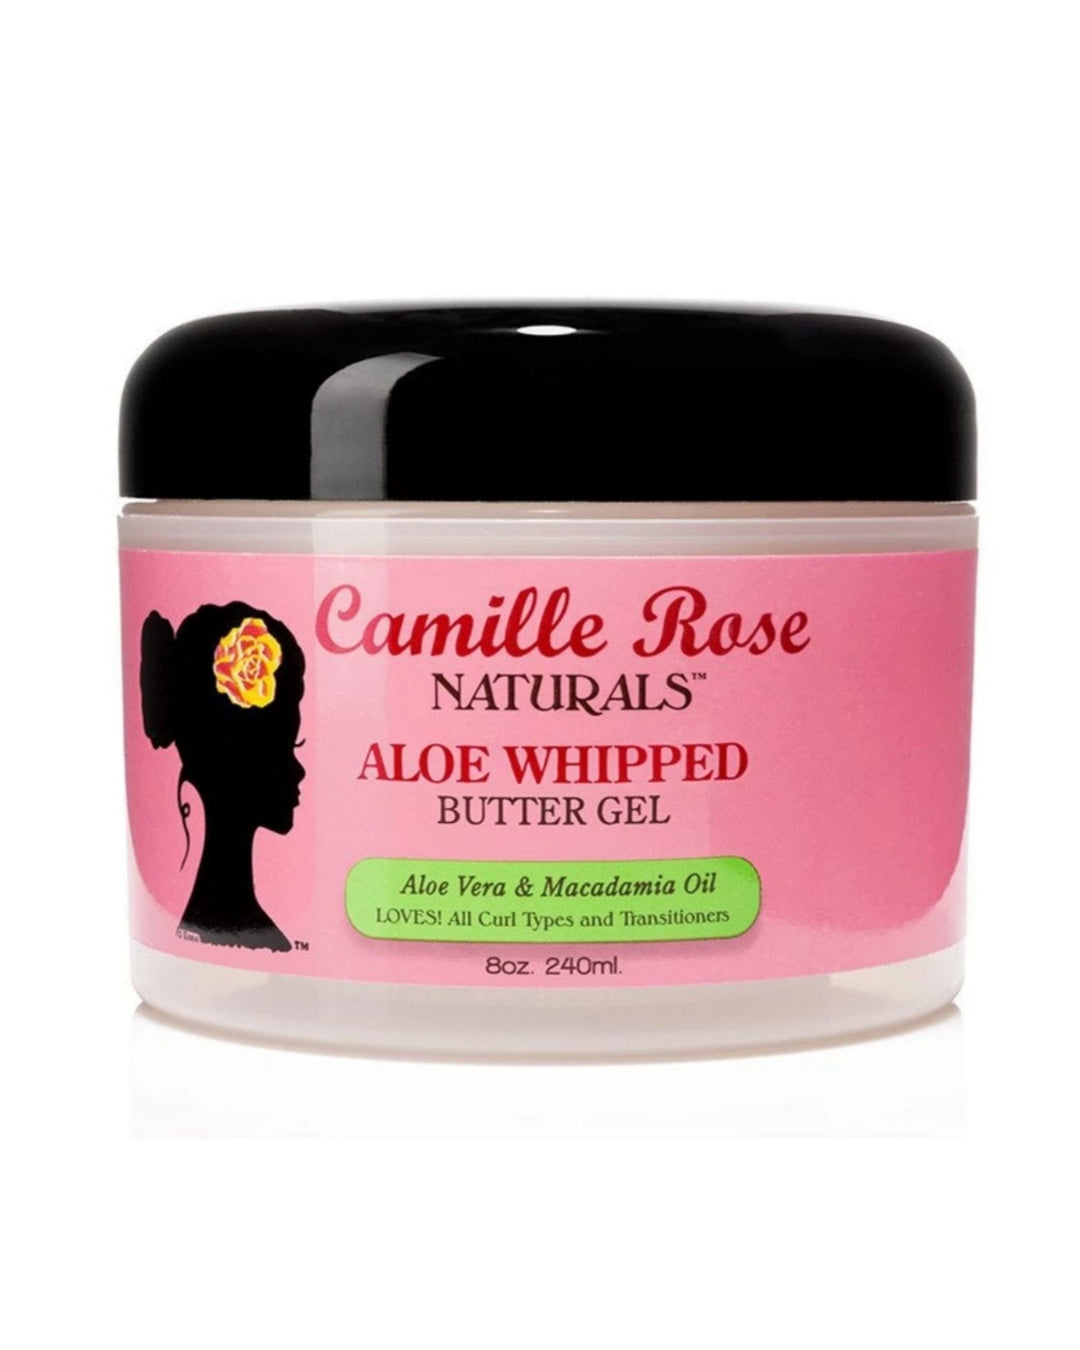 Camille Rose Naturals Aloe Whipped Butter Gel